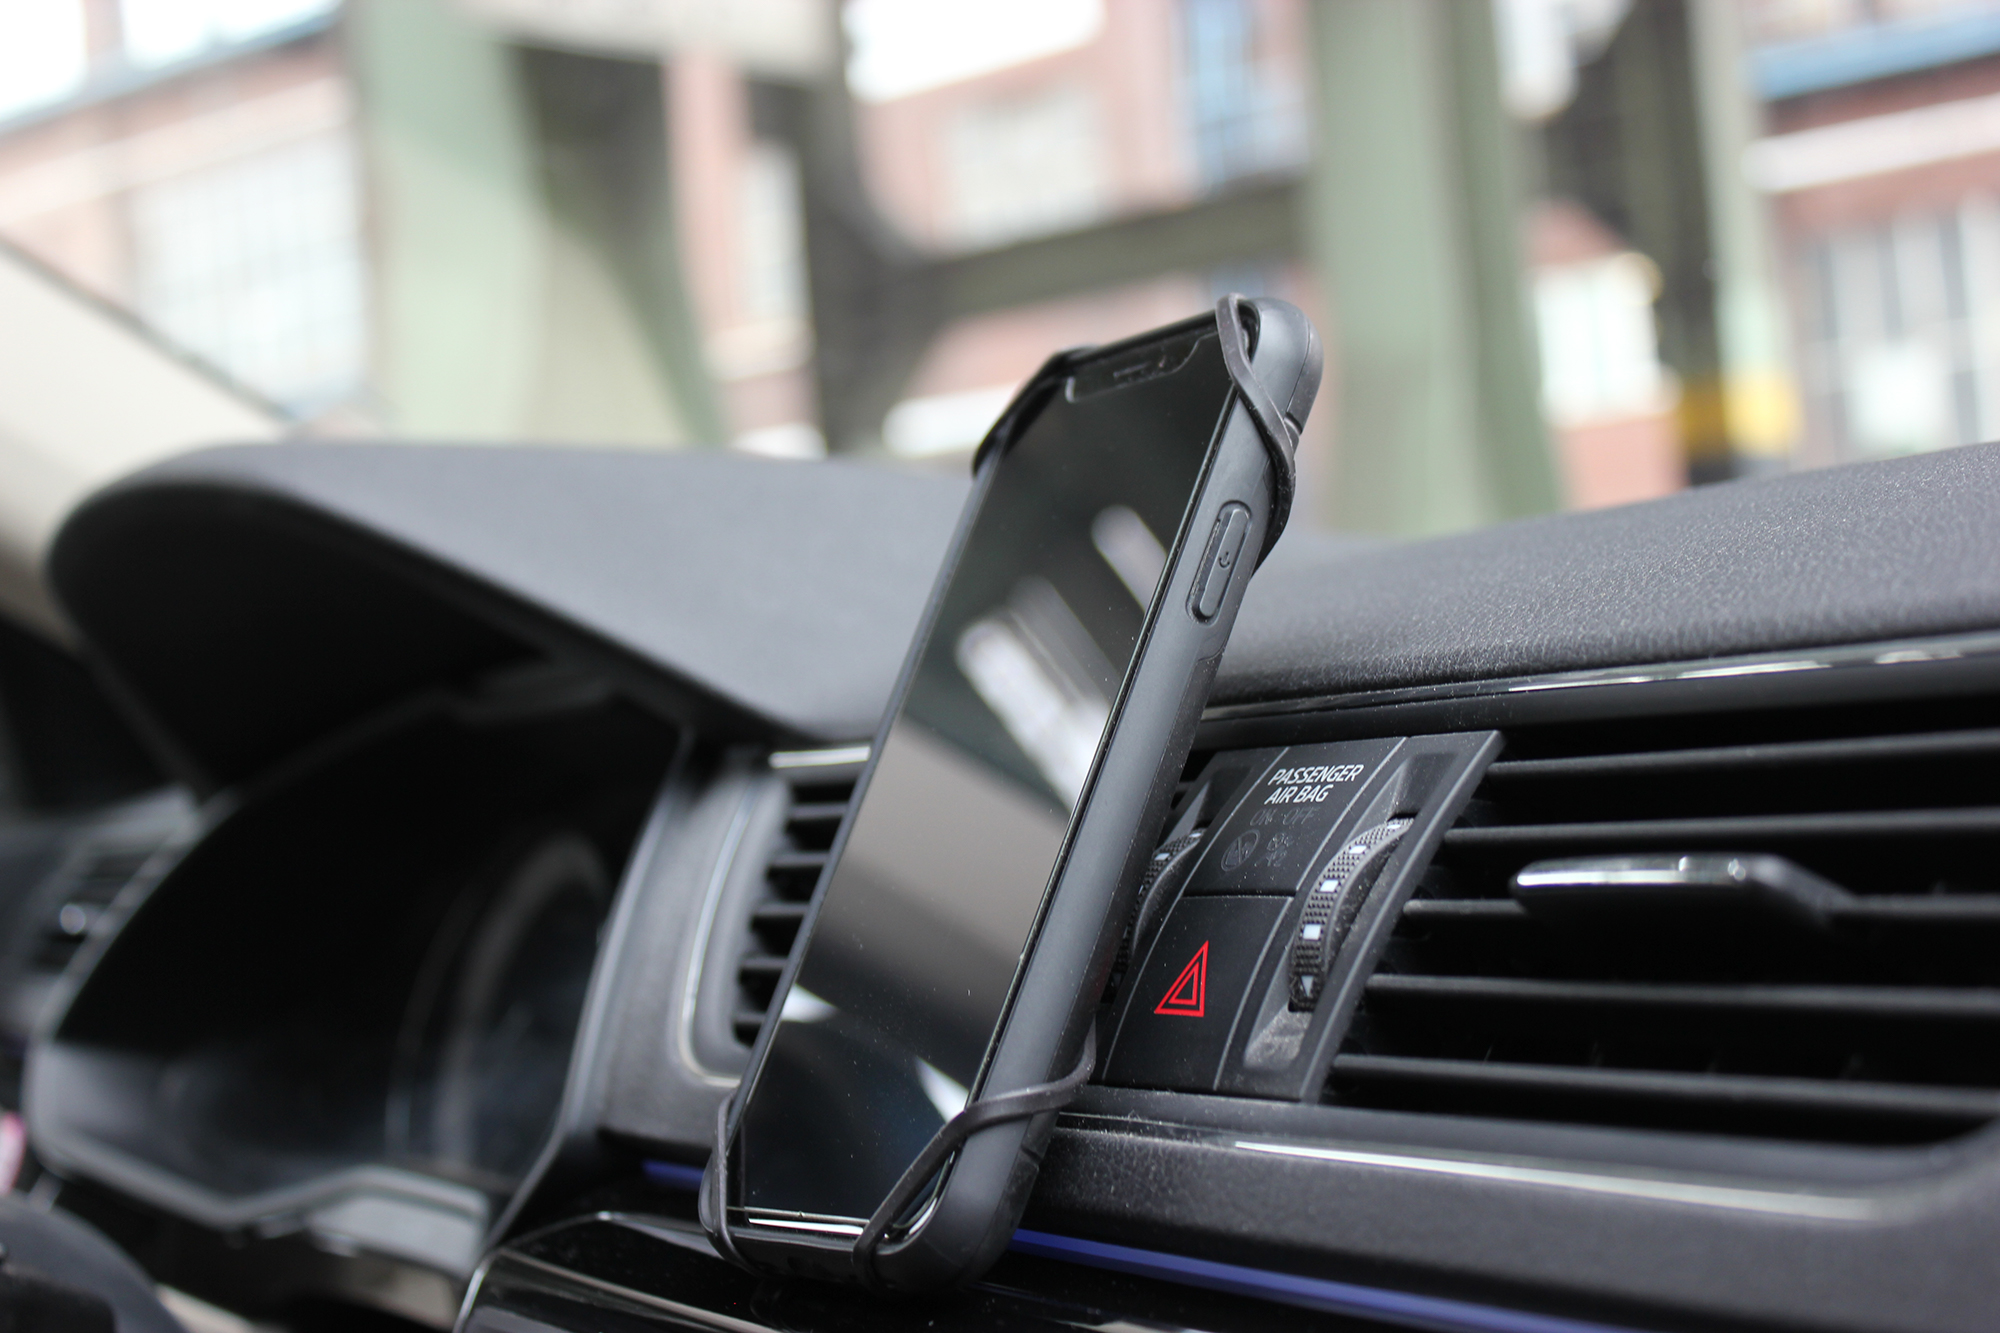 The innovative ‘butterfly’ smartphone holder attached to the vents of a car